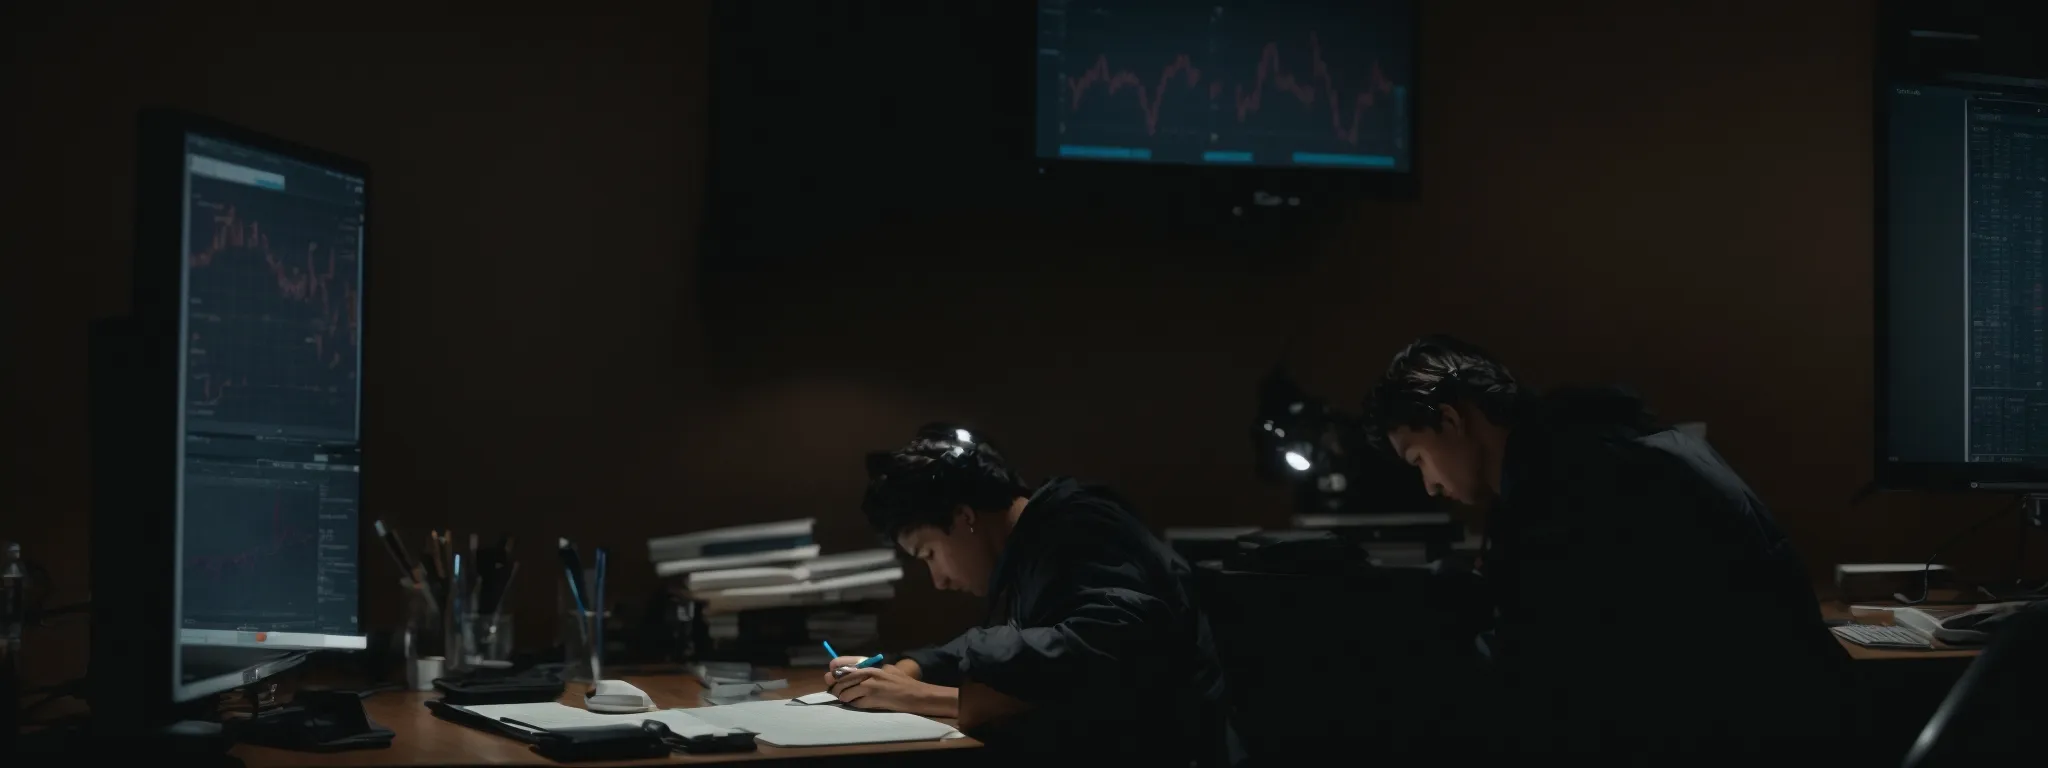 a person sitting at a computer, analyzing graphs and data on the screen while taking notes.